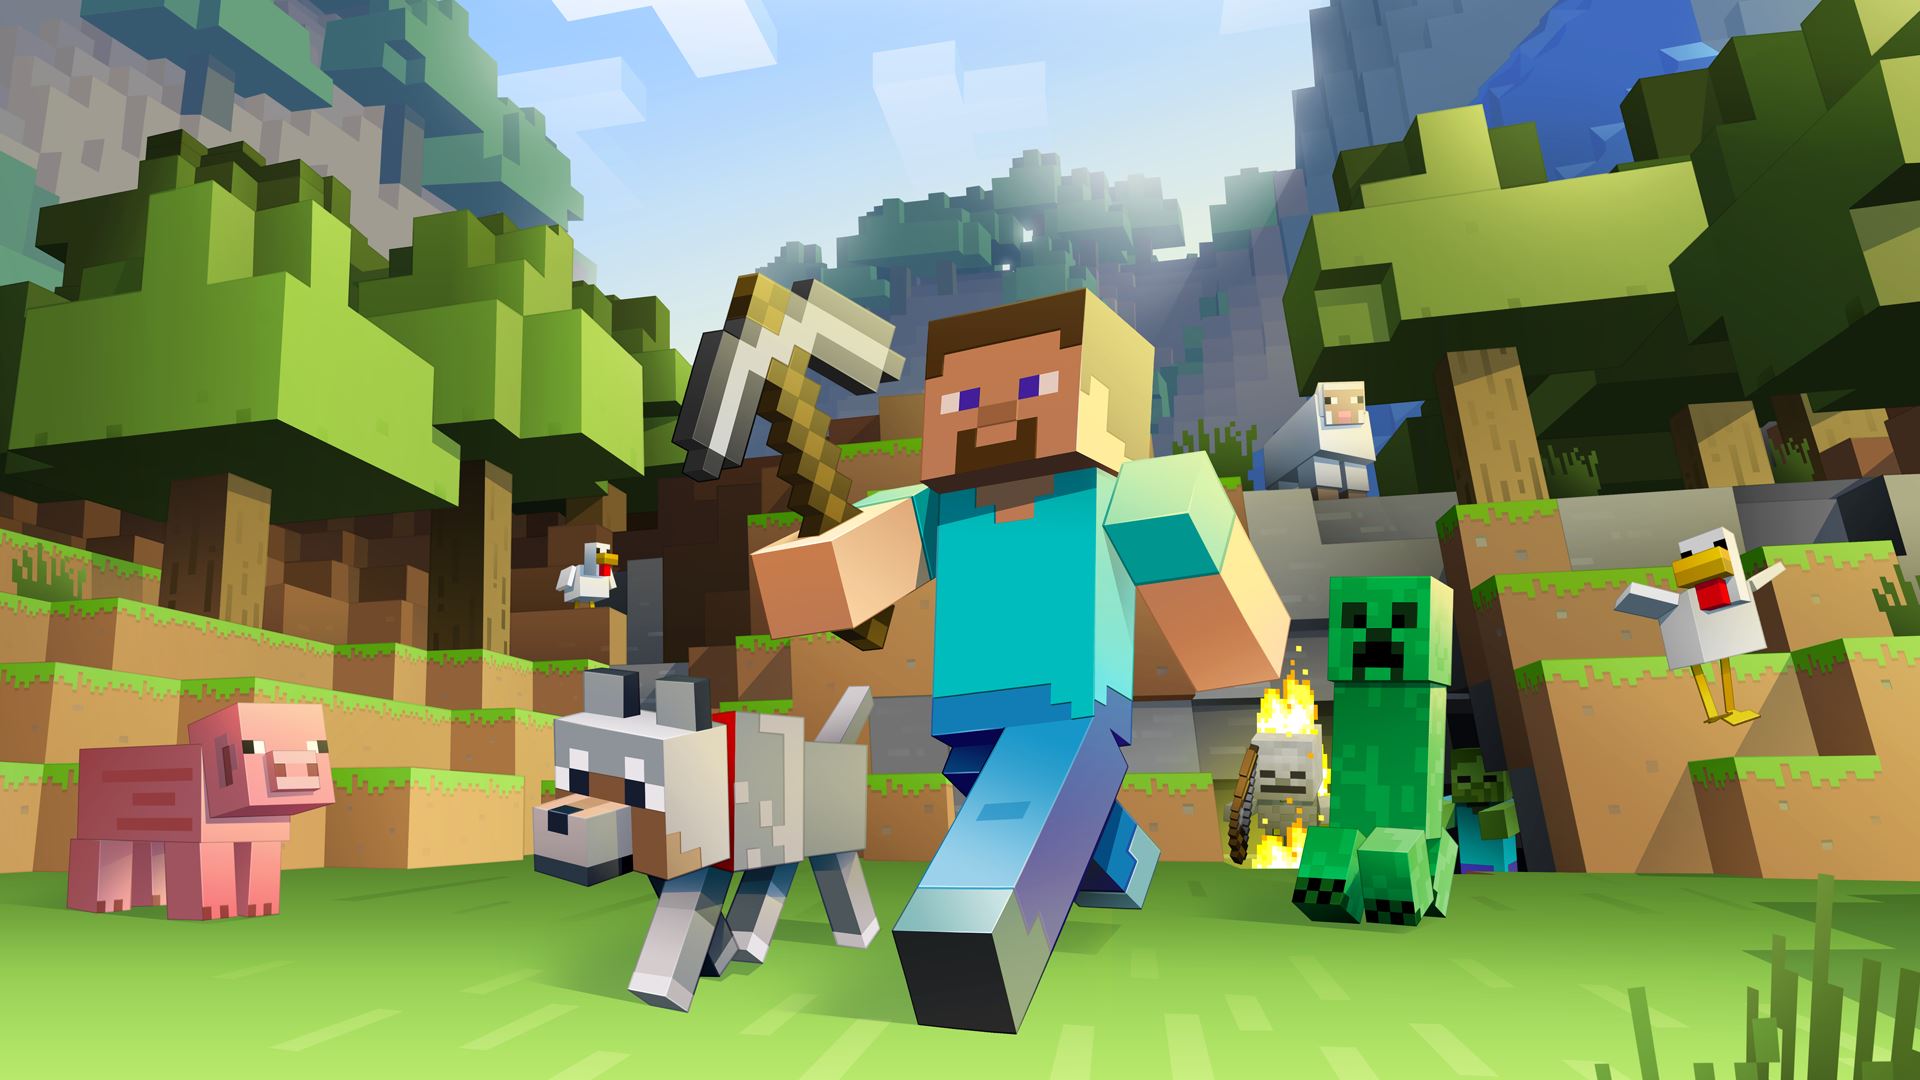 10 Things About Minecraft Parents Need to Know - Gameranx